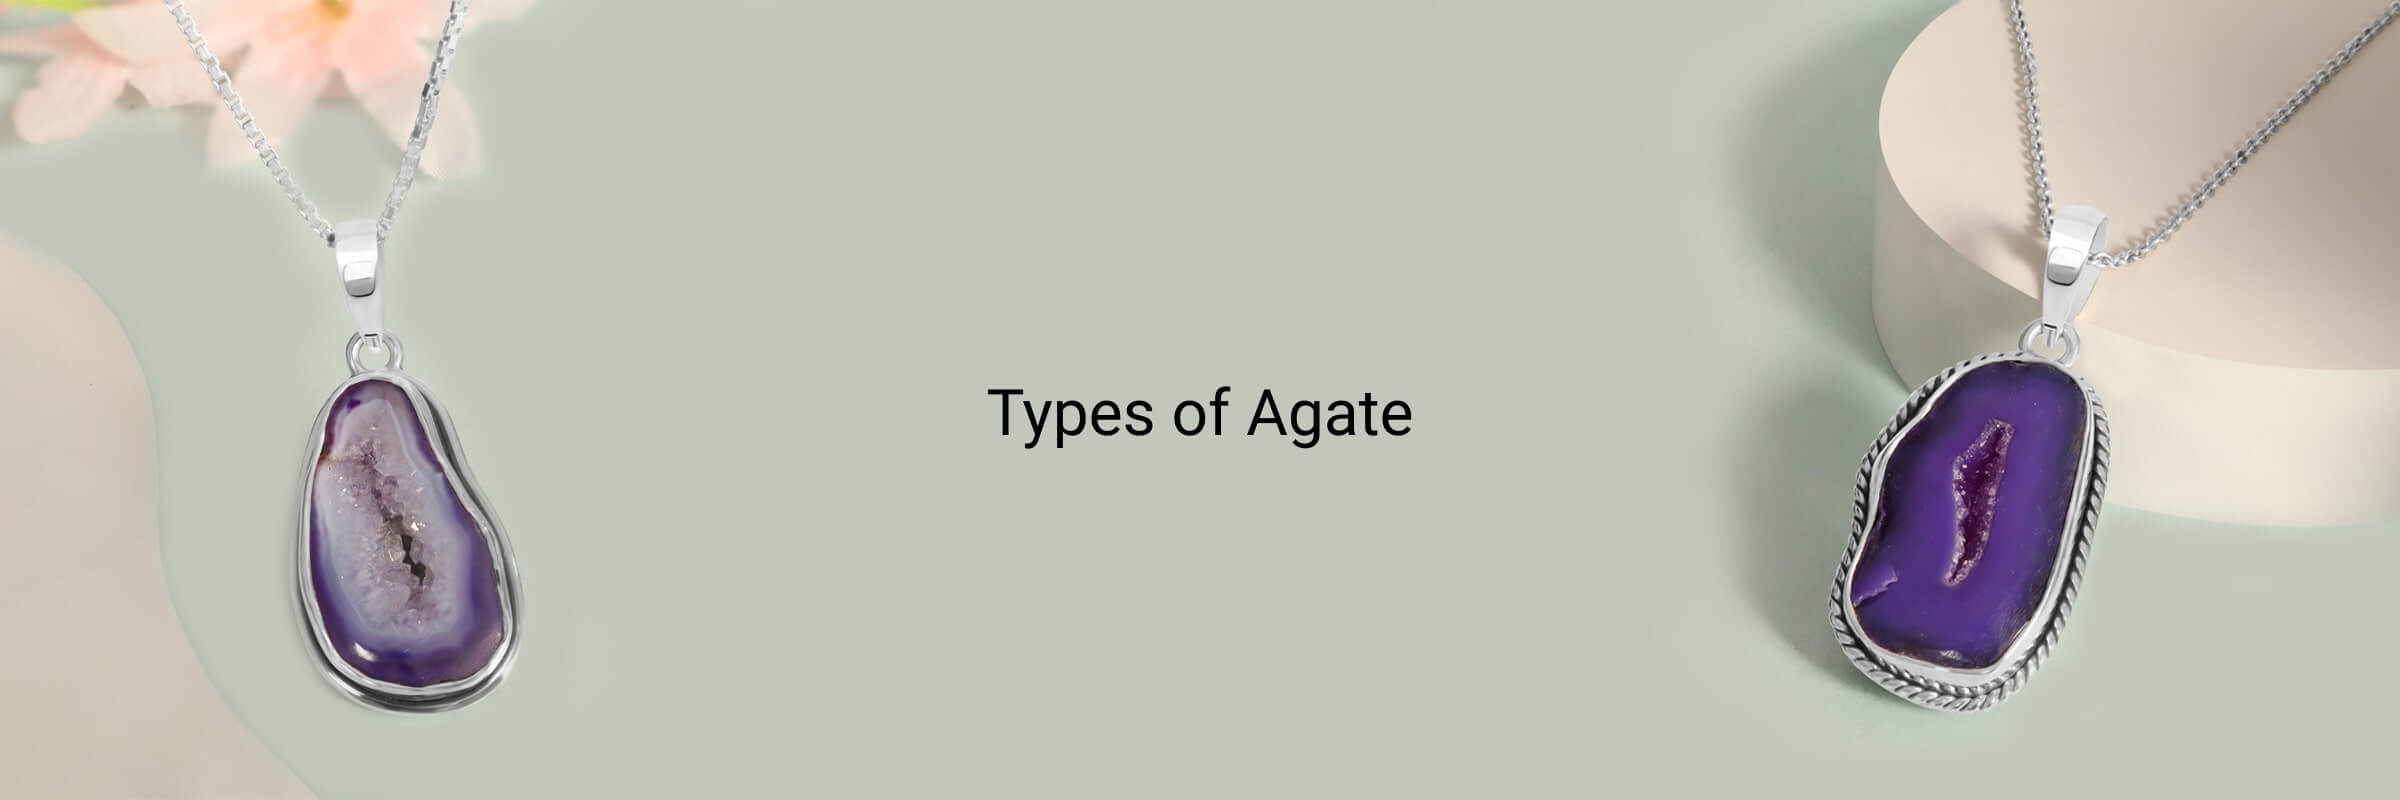 Agate: Types